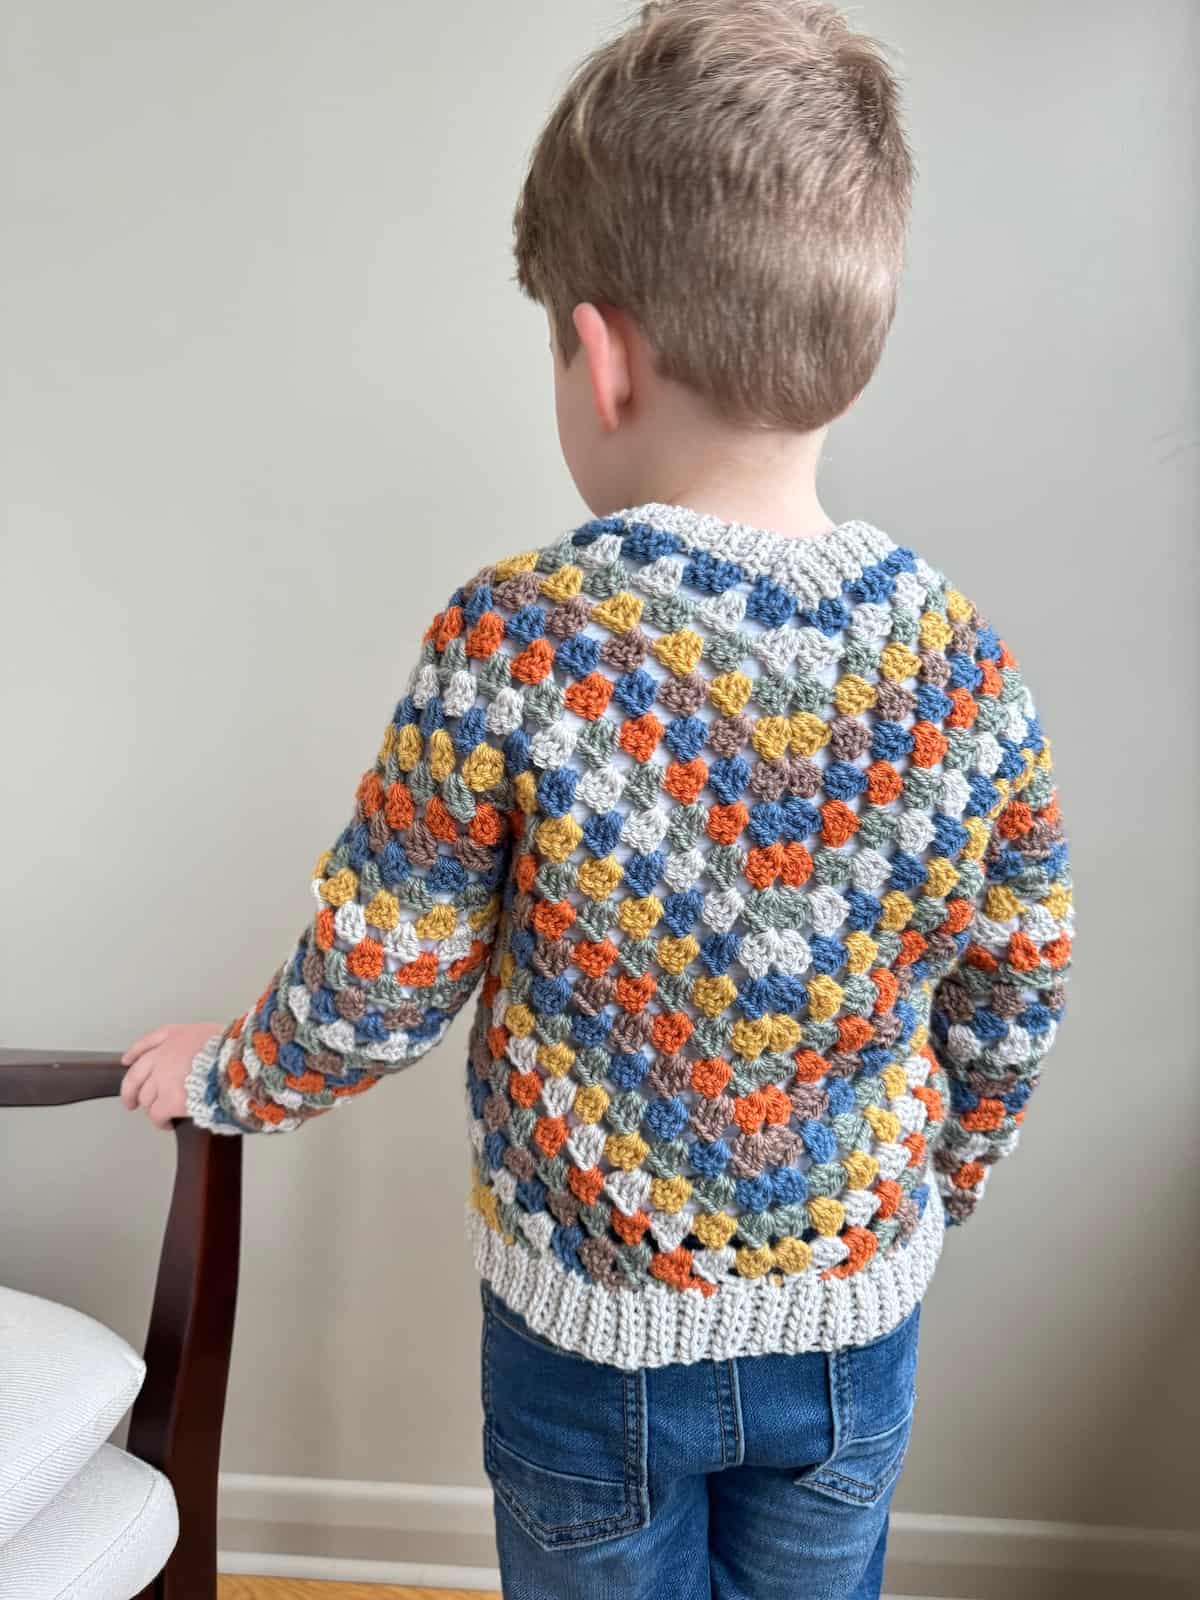 A young child in a crocheted sweater.